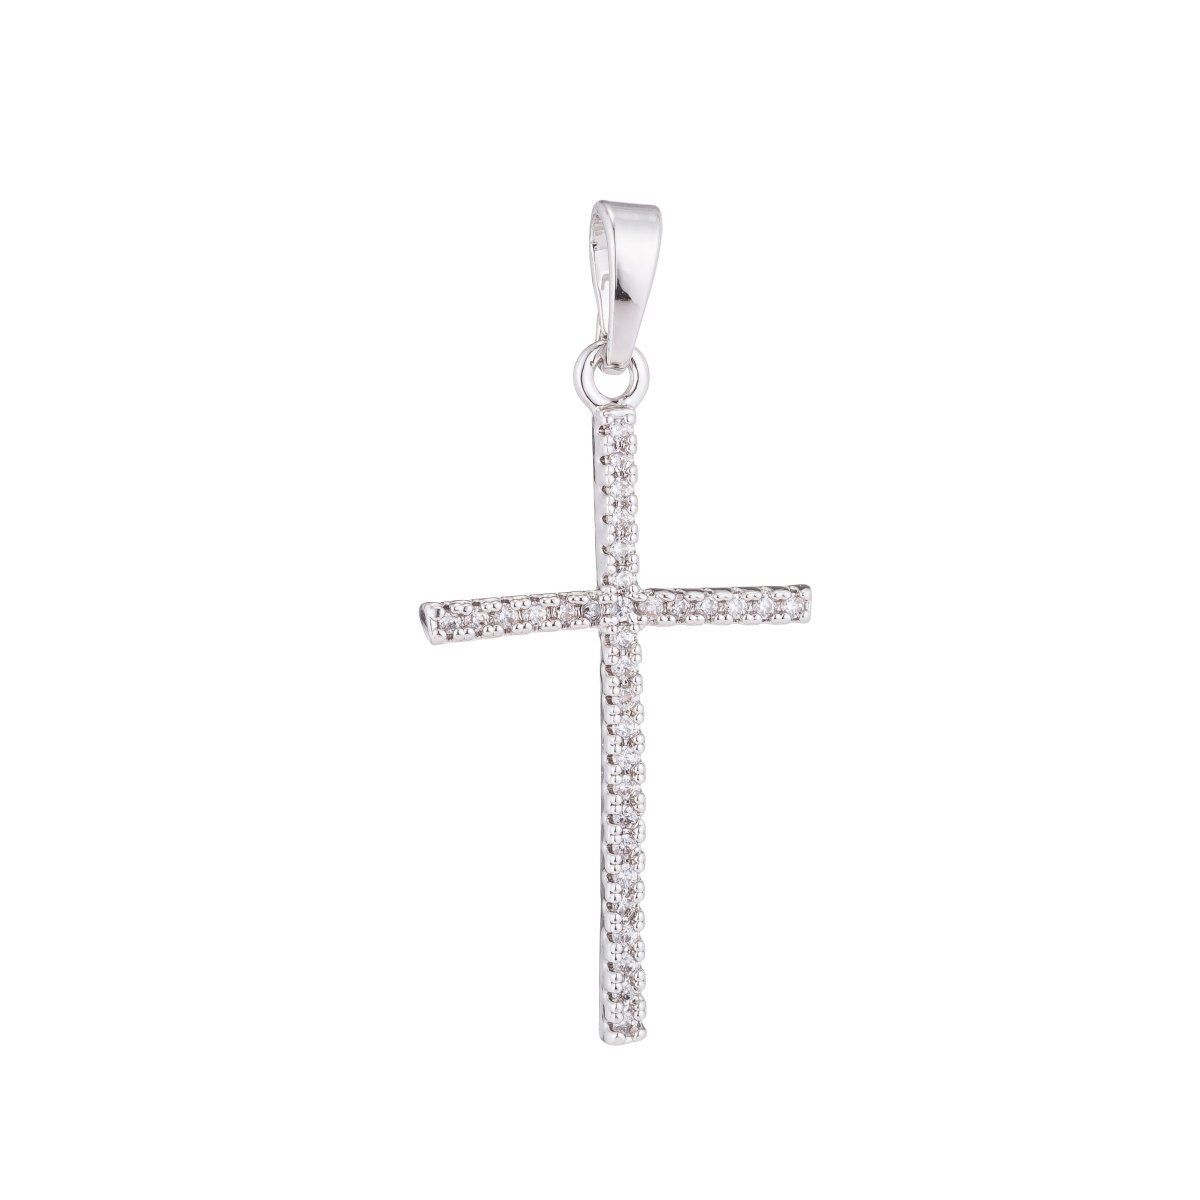 Silver Slim Cross, Heavenly, God, Jesus, Spiritual Gift DIY Cubic Zirconia Necklace Pendant Charm Bead Bails Findings for Jewelry Making H-136 - DLUXCA